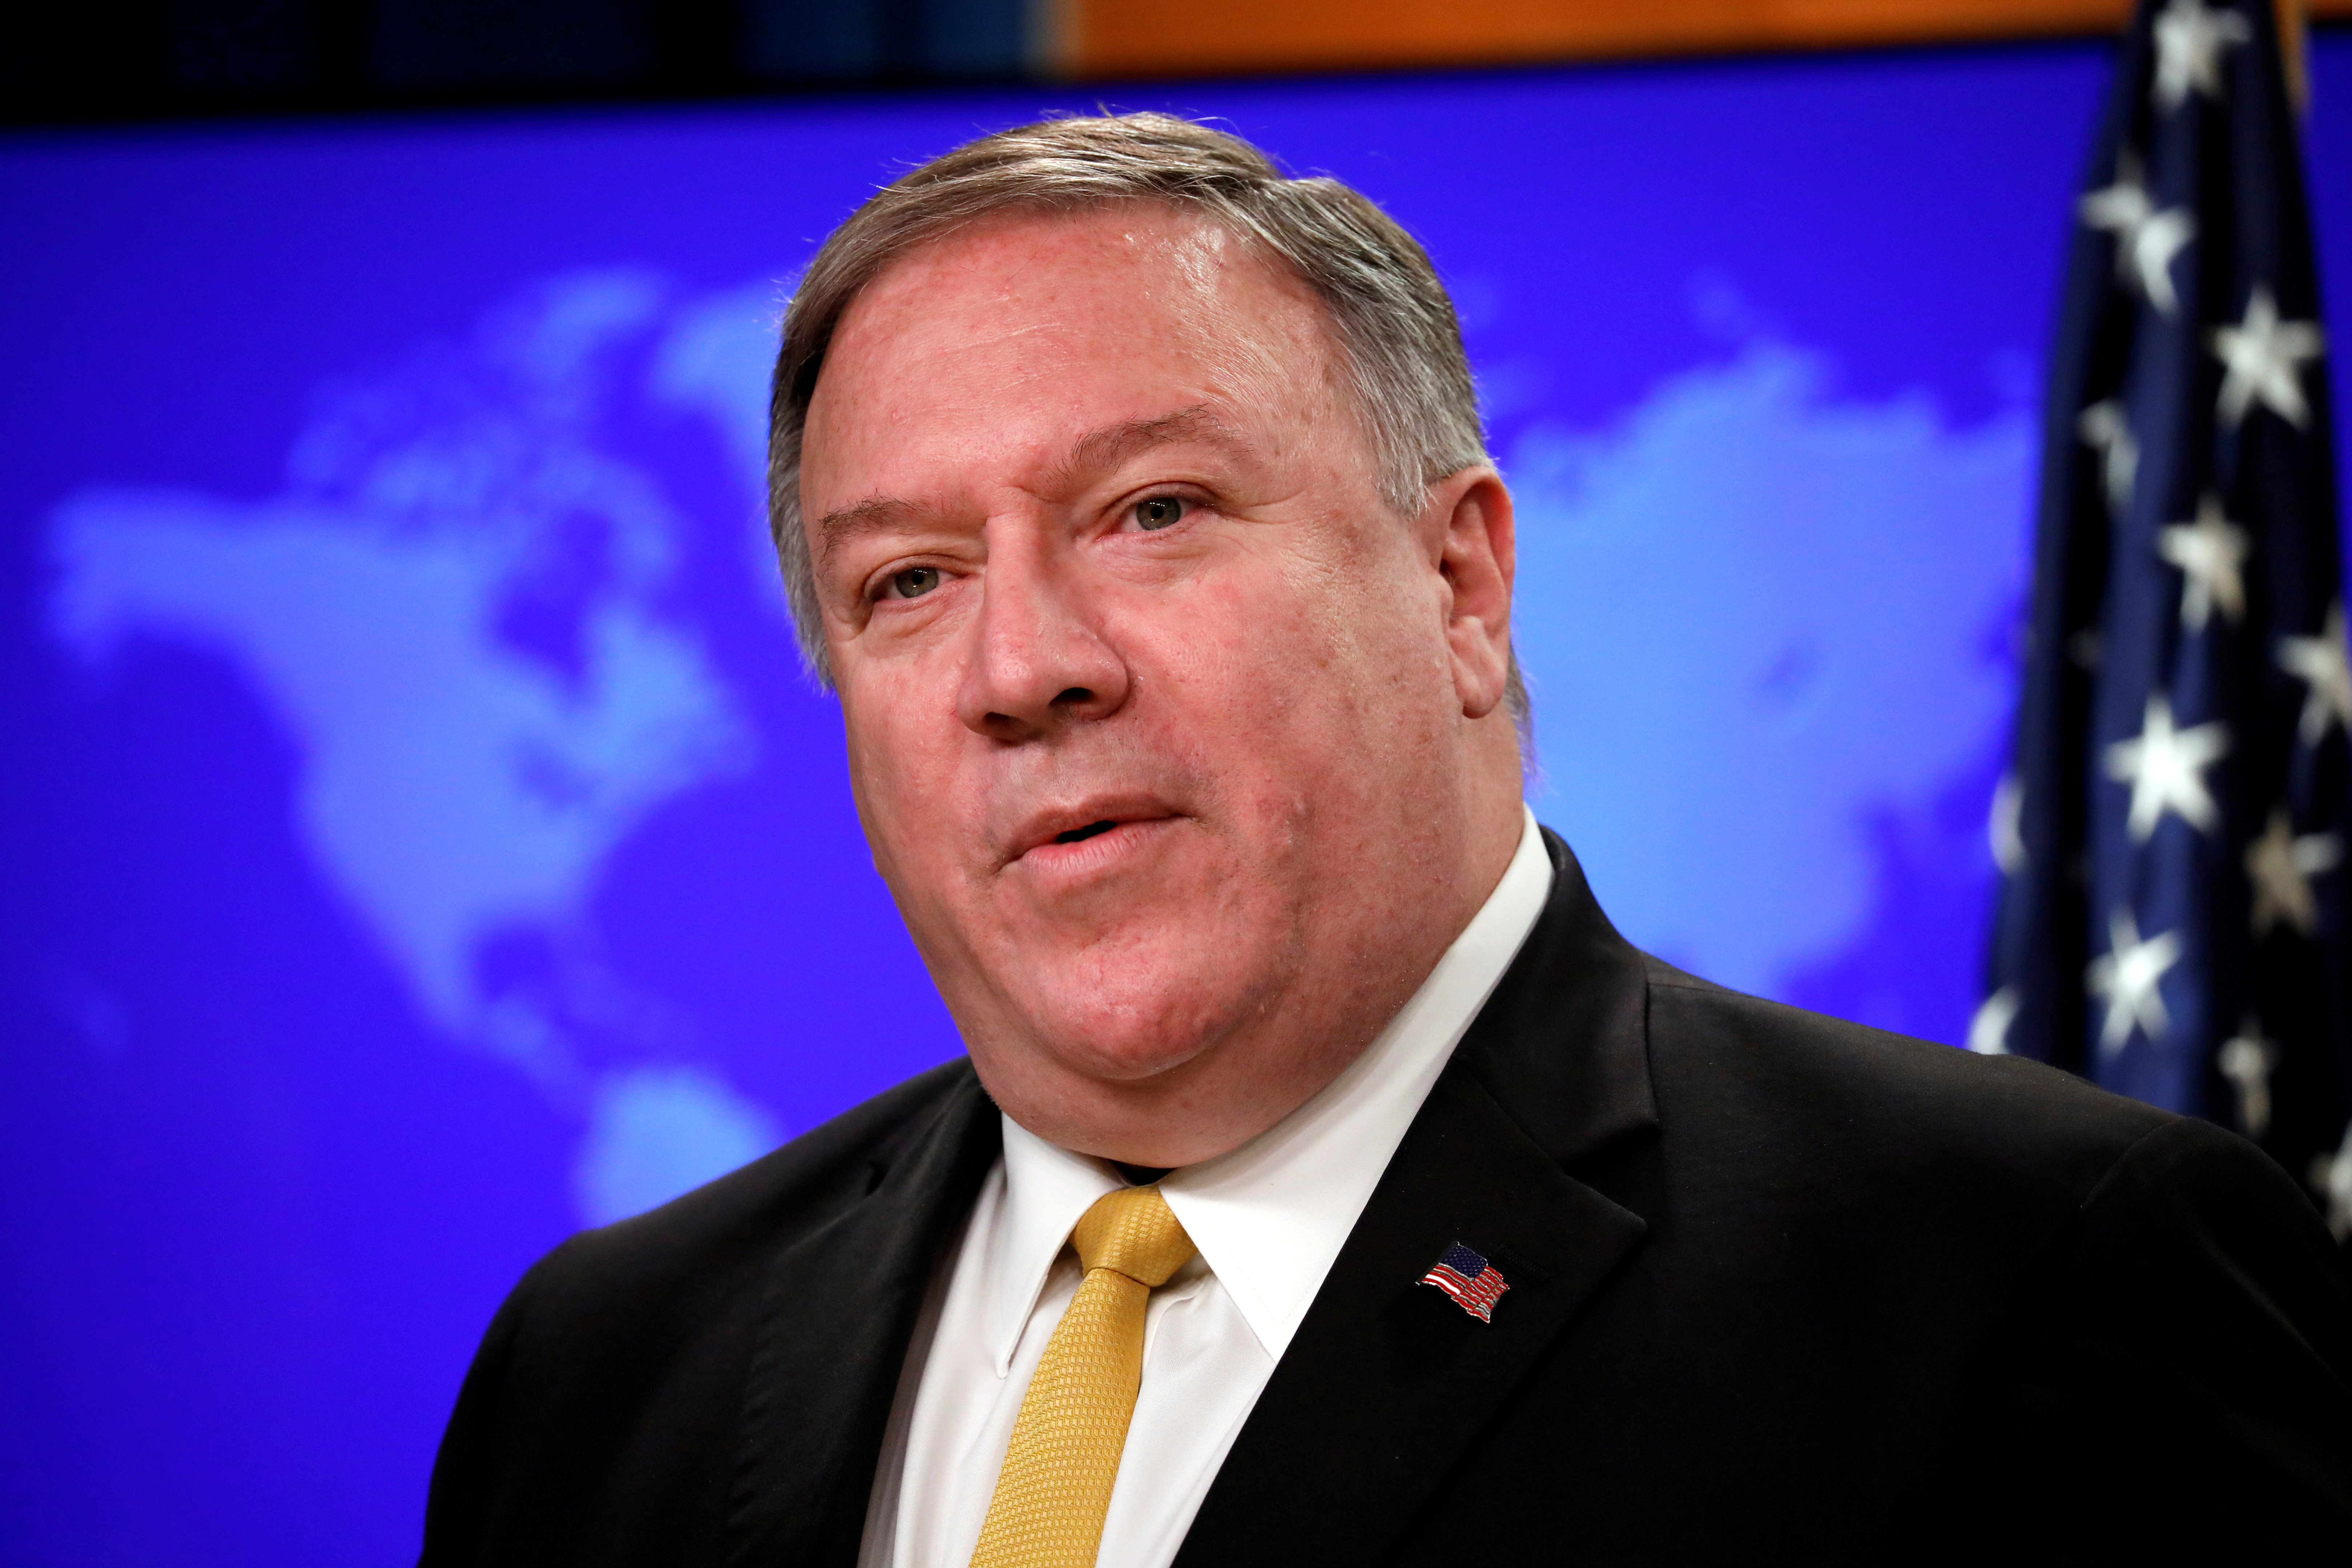 Former Secretary of State Pompeo defends Trump administration's 'orderly' Afghanistan strategy